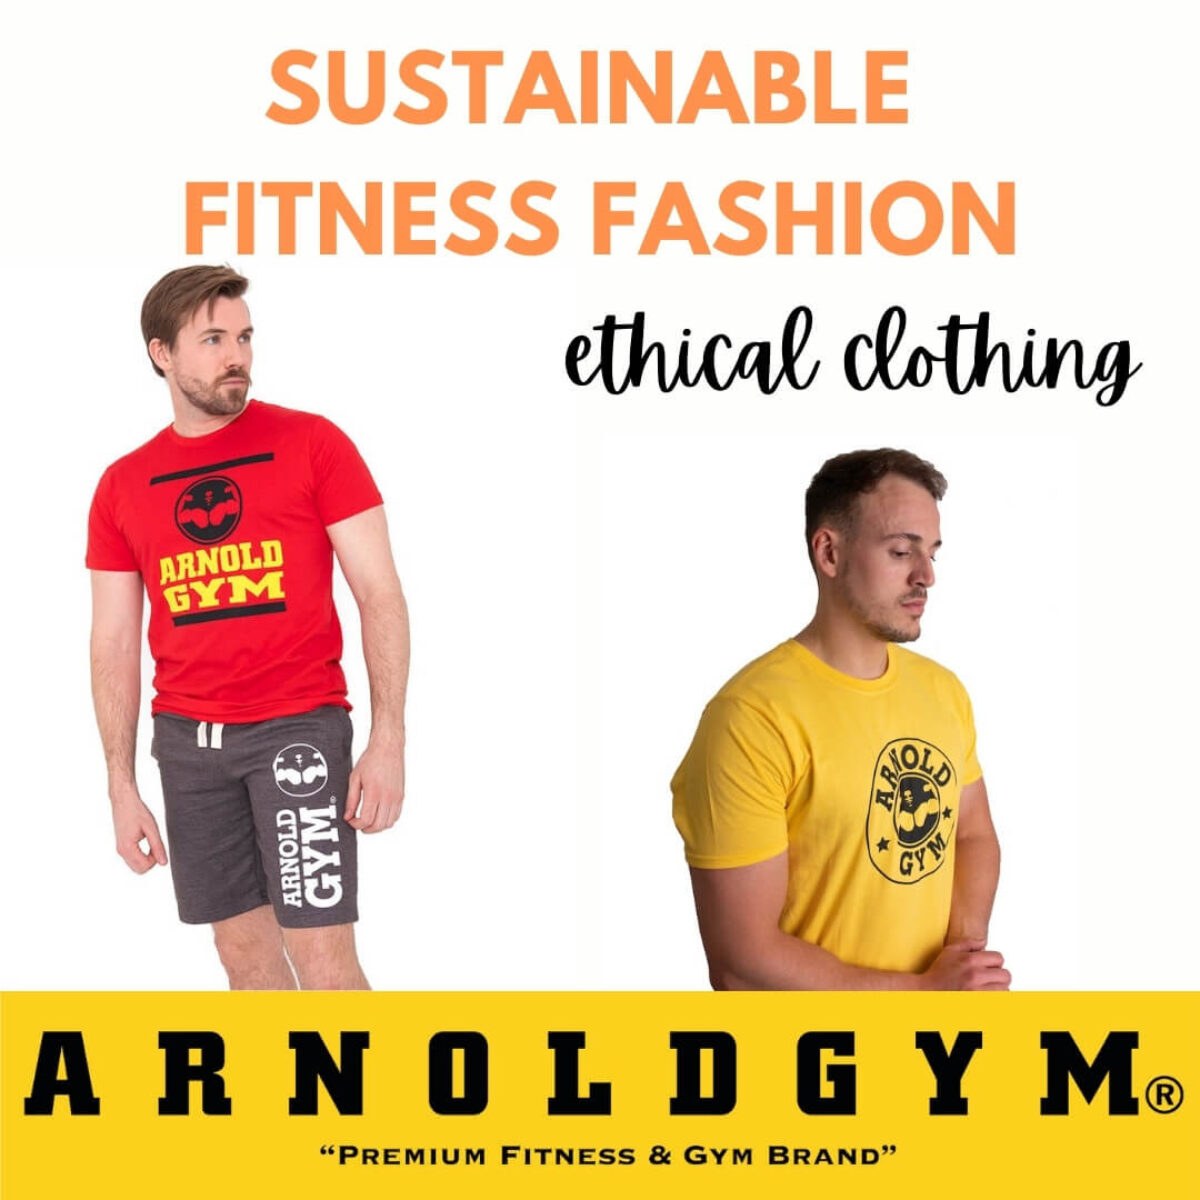 https://www.arnoldgymgear.com/wp-content/uploads/2022/07/sustainable-fashion-ethical-clothing-arnold-gym-1200x1200.jpg